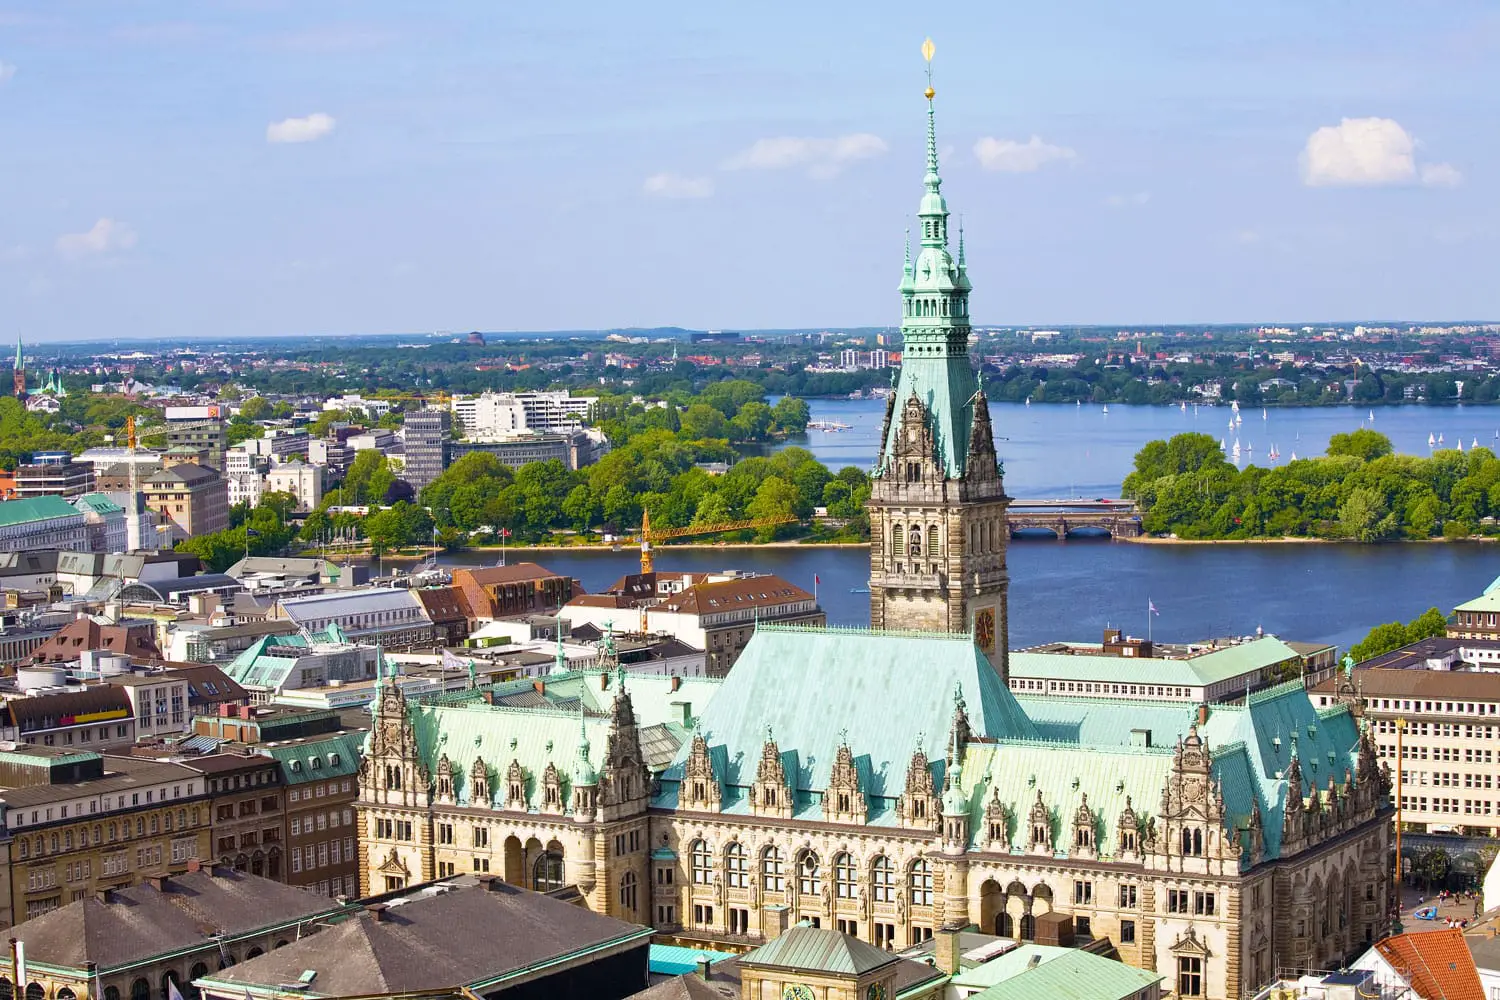 Hamburg town hall Germany with historical building view